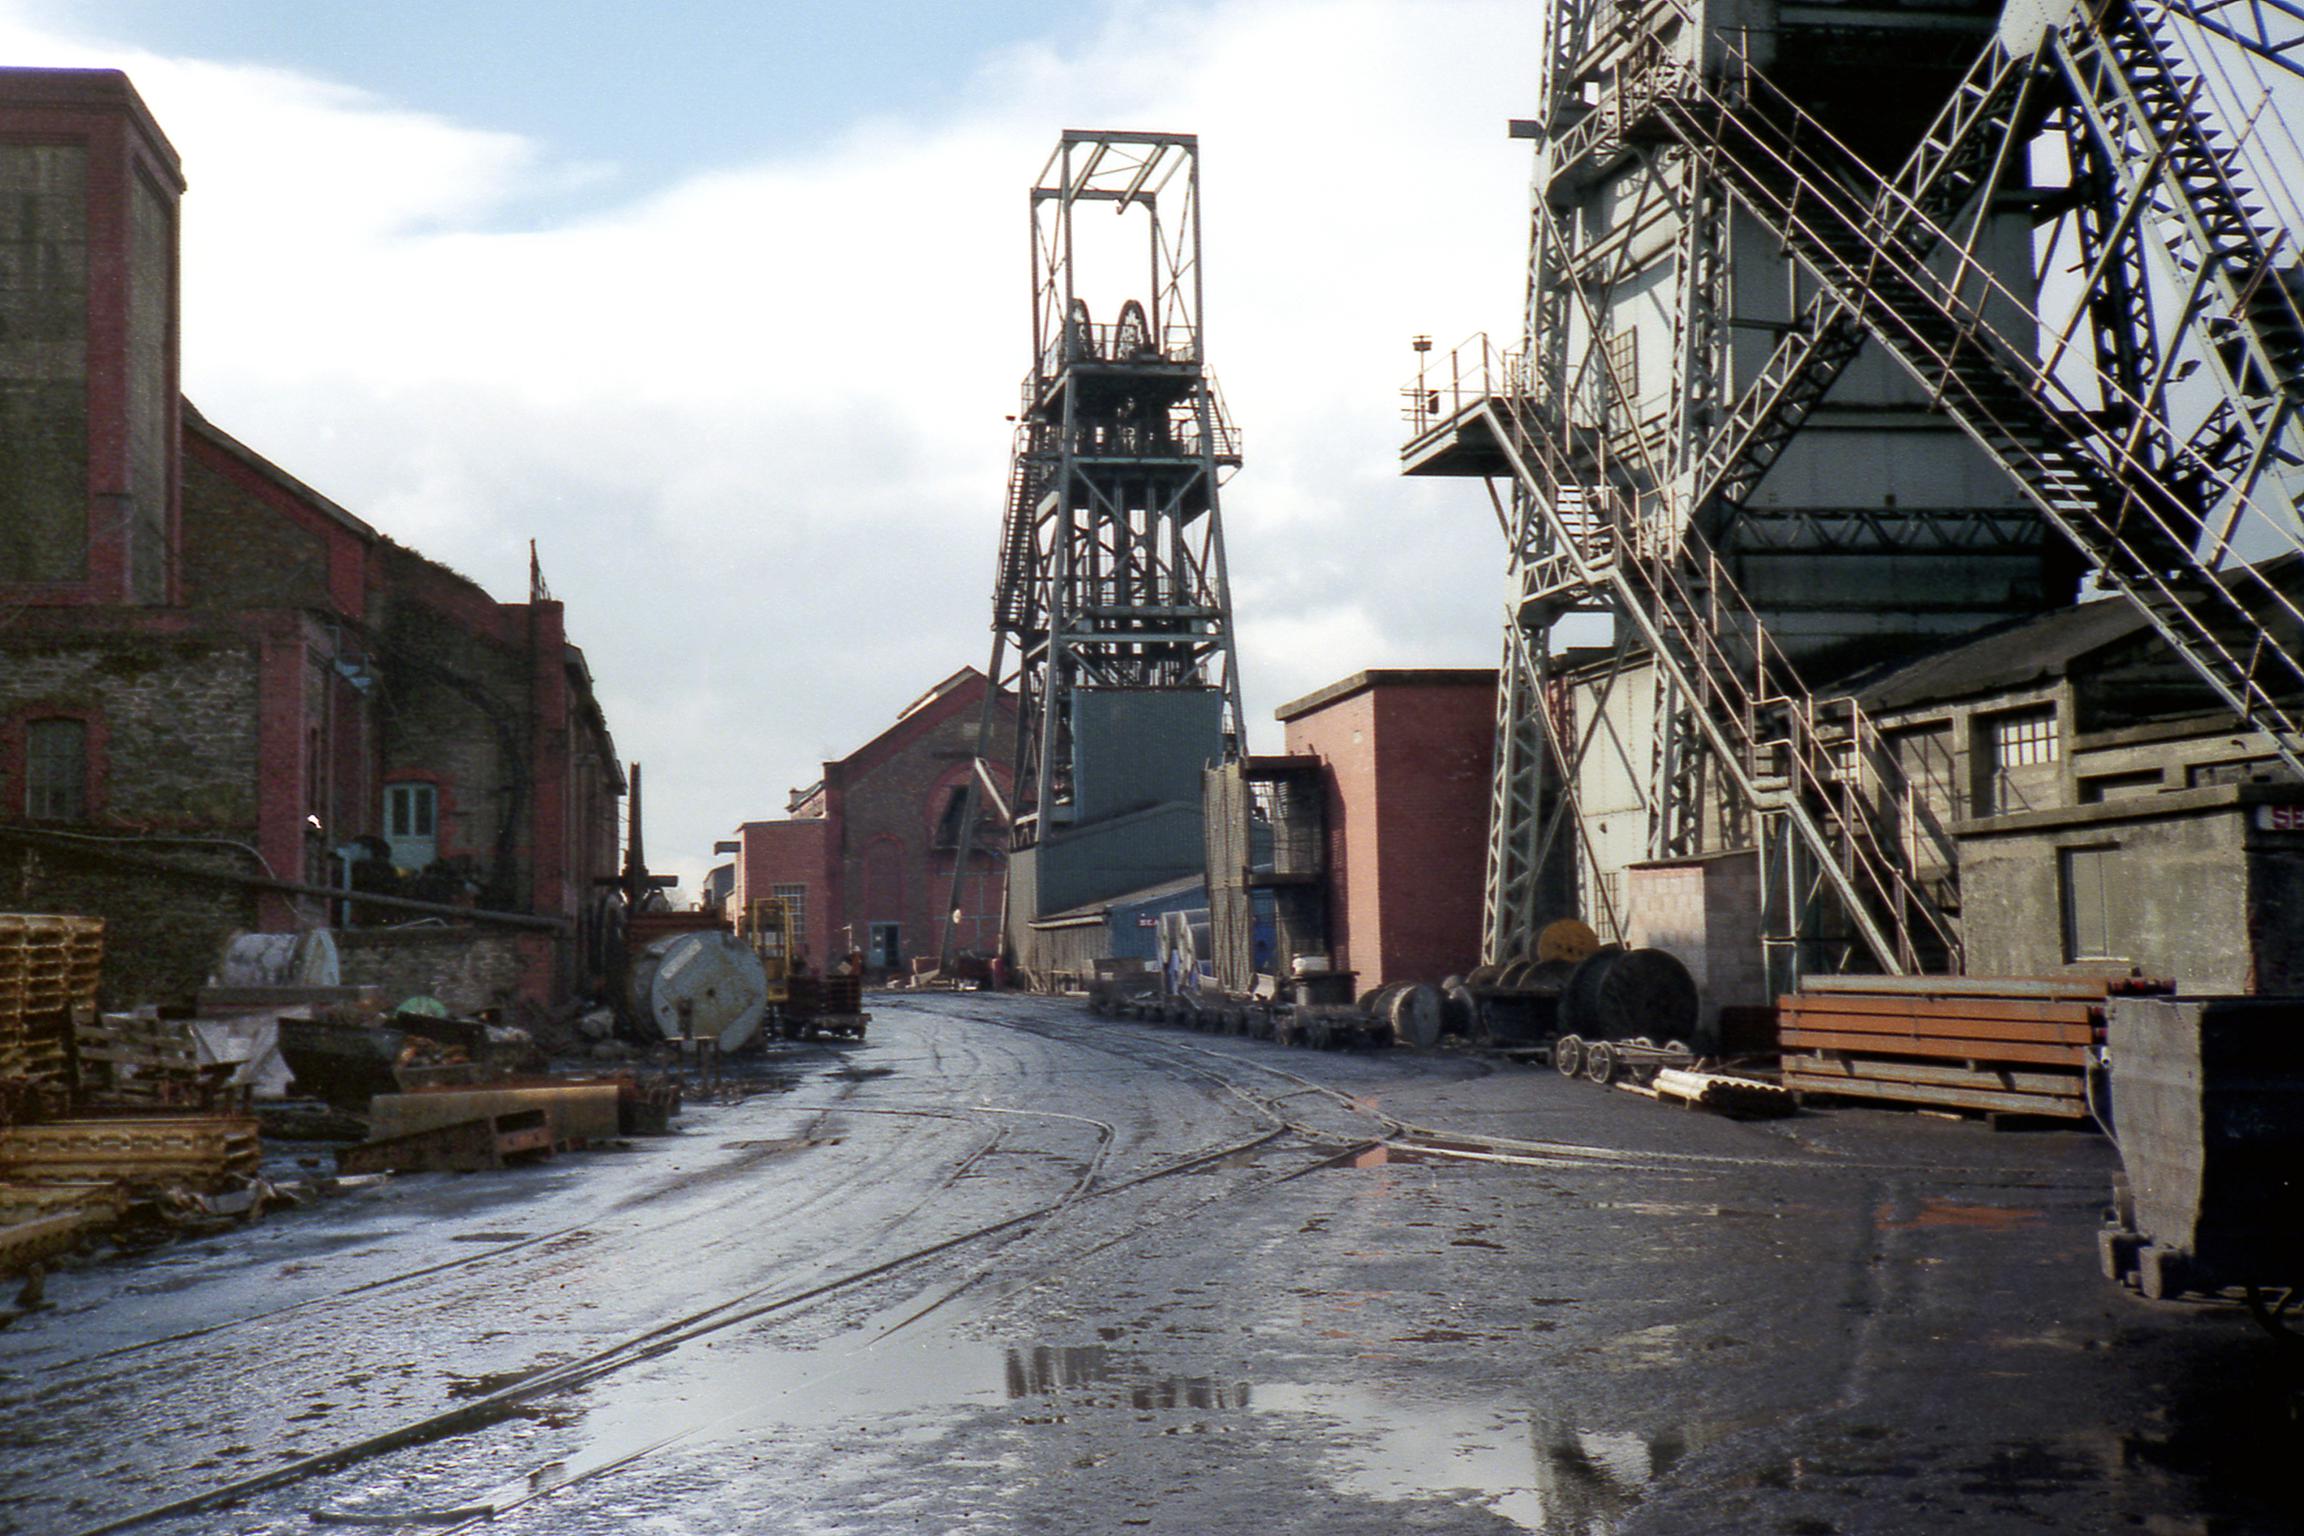 Oakdale Colliery, photograph